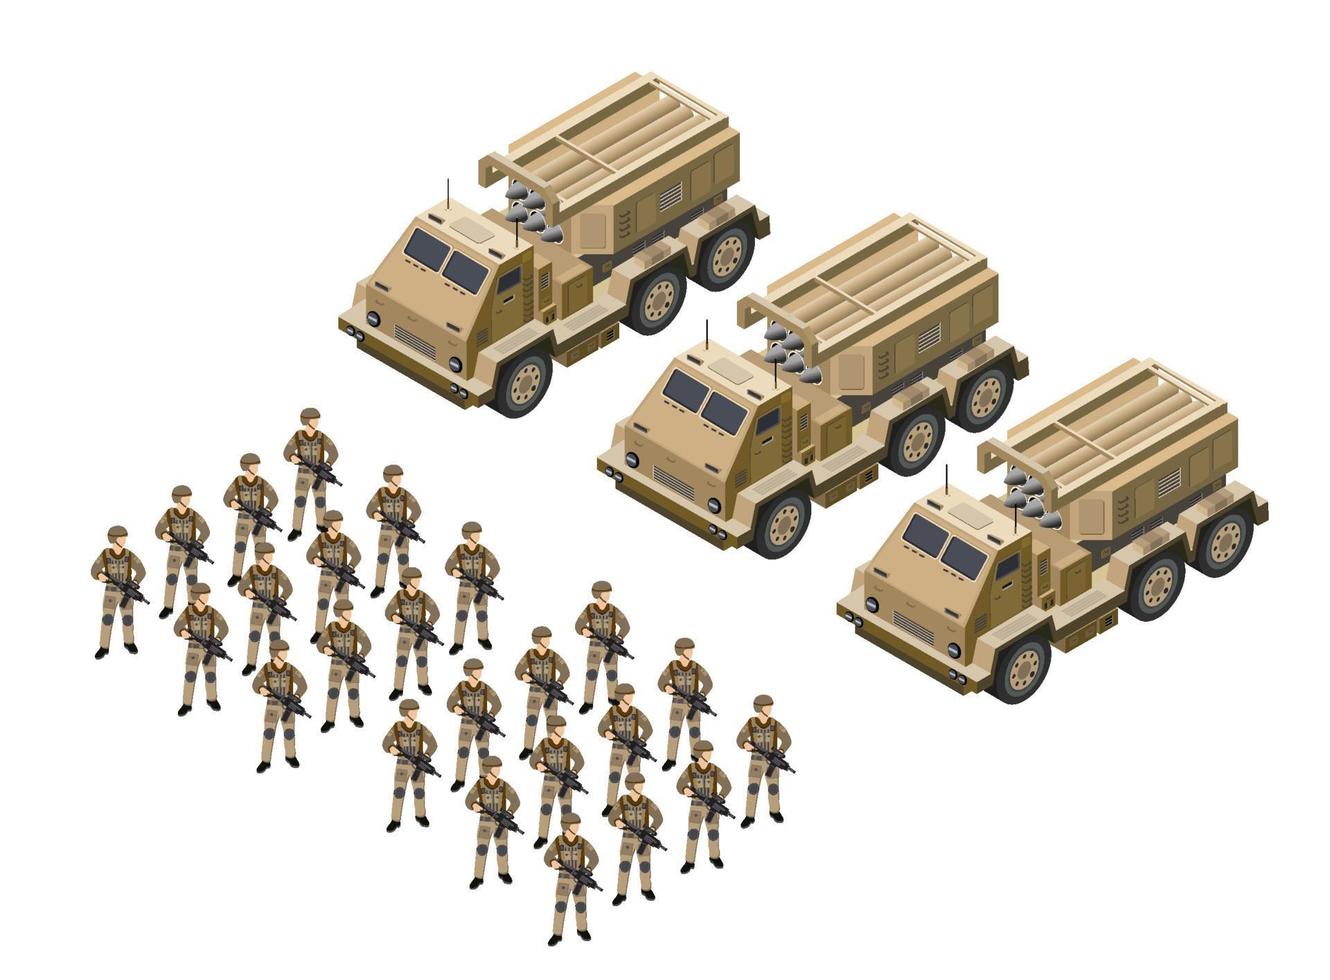 Multiple launch rocket systems army vehicles army missiles defense camouflage. Isometric 3d vector illustration.